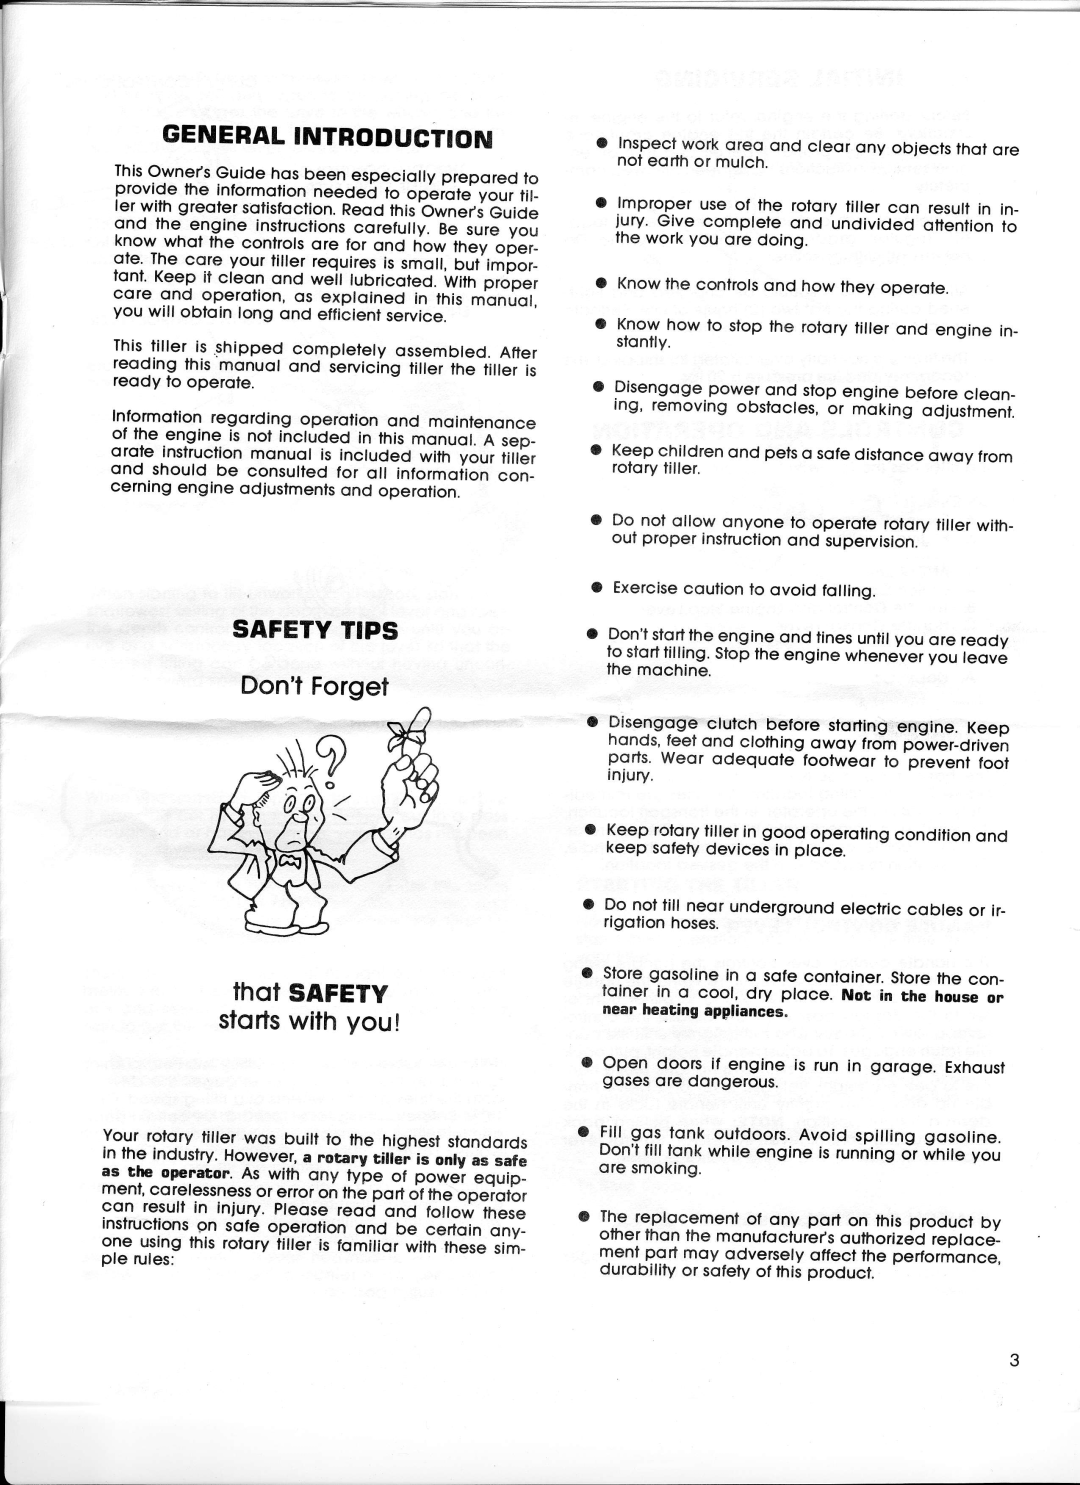 Ward's GIL-39012B manual DontForget, Safetytips, thot SAFETY stortswith you, Generalintroduction 